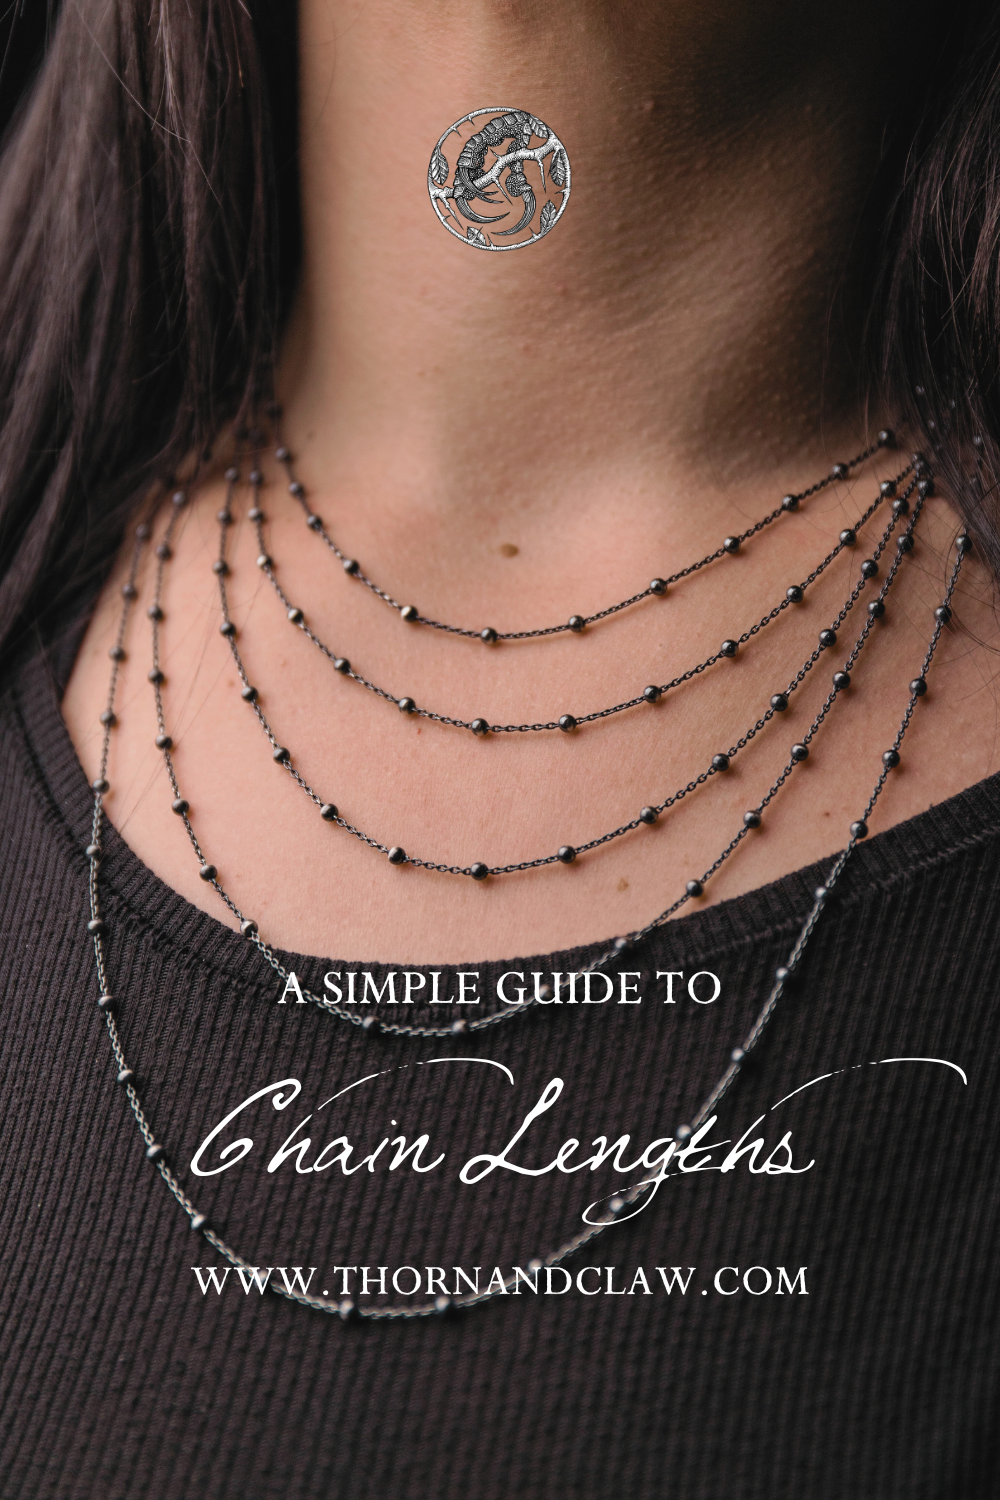 Necklace length guide